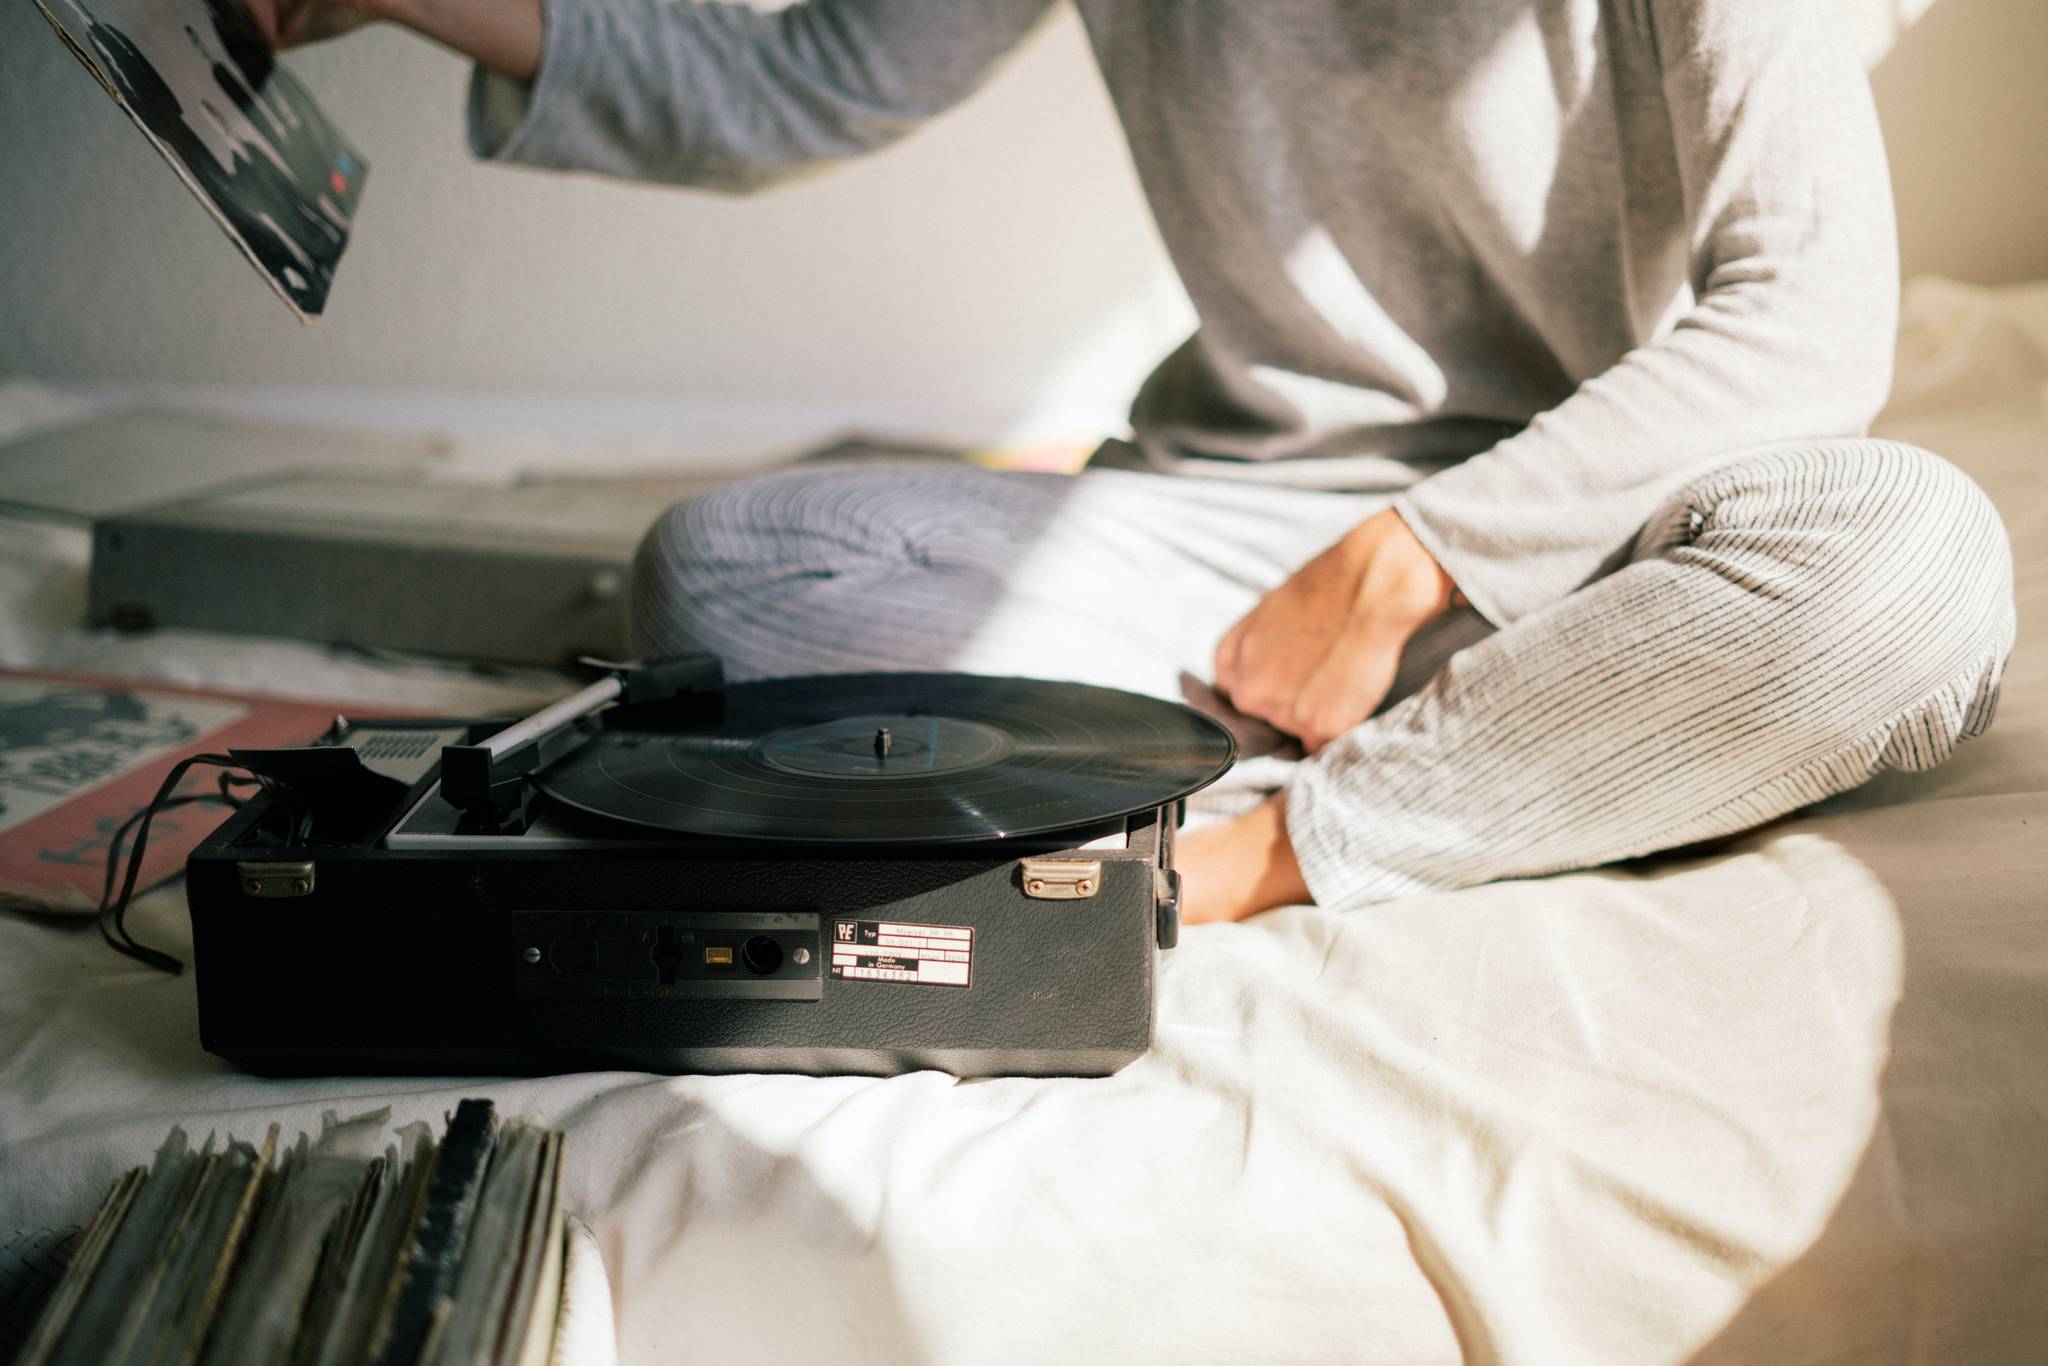 Vinyl sales growth signals a strong desire to unplug